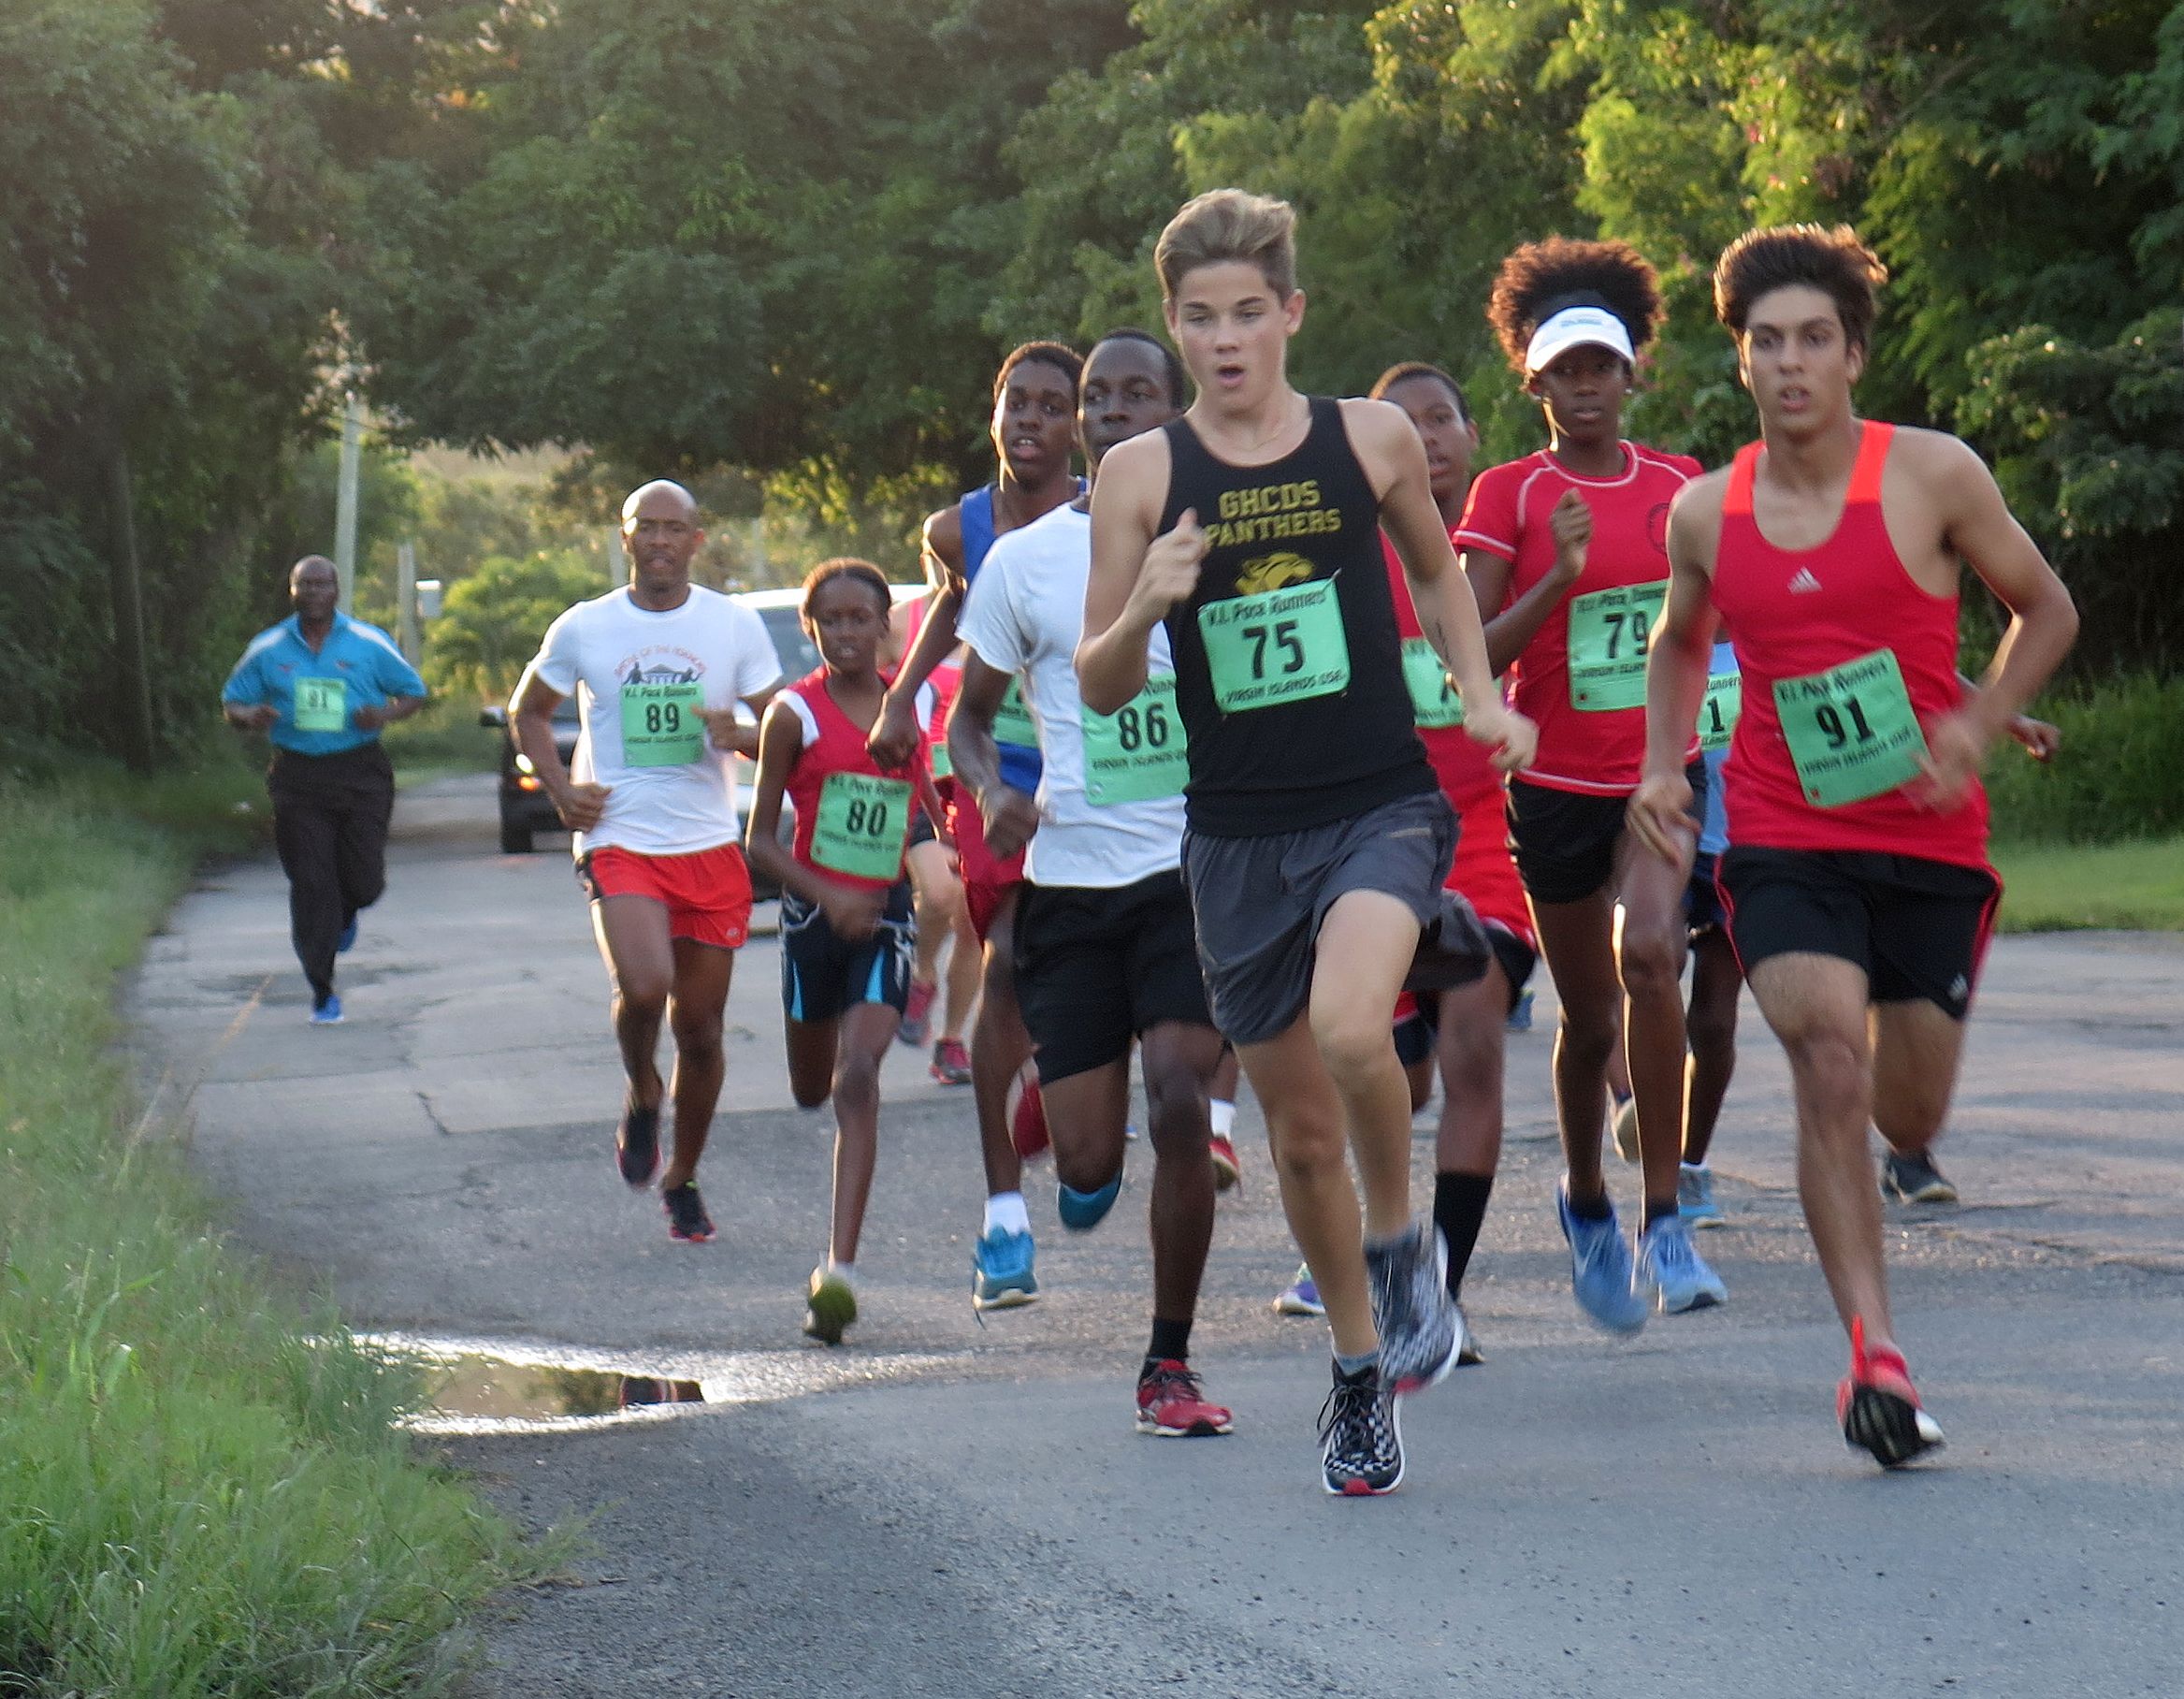 Runners at start of St. Croix Metric Mile Race